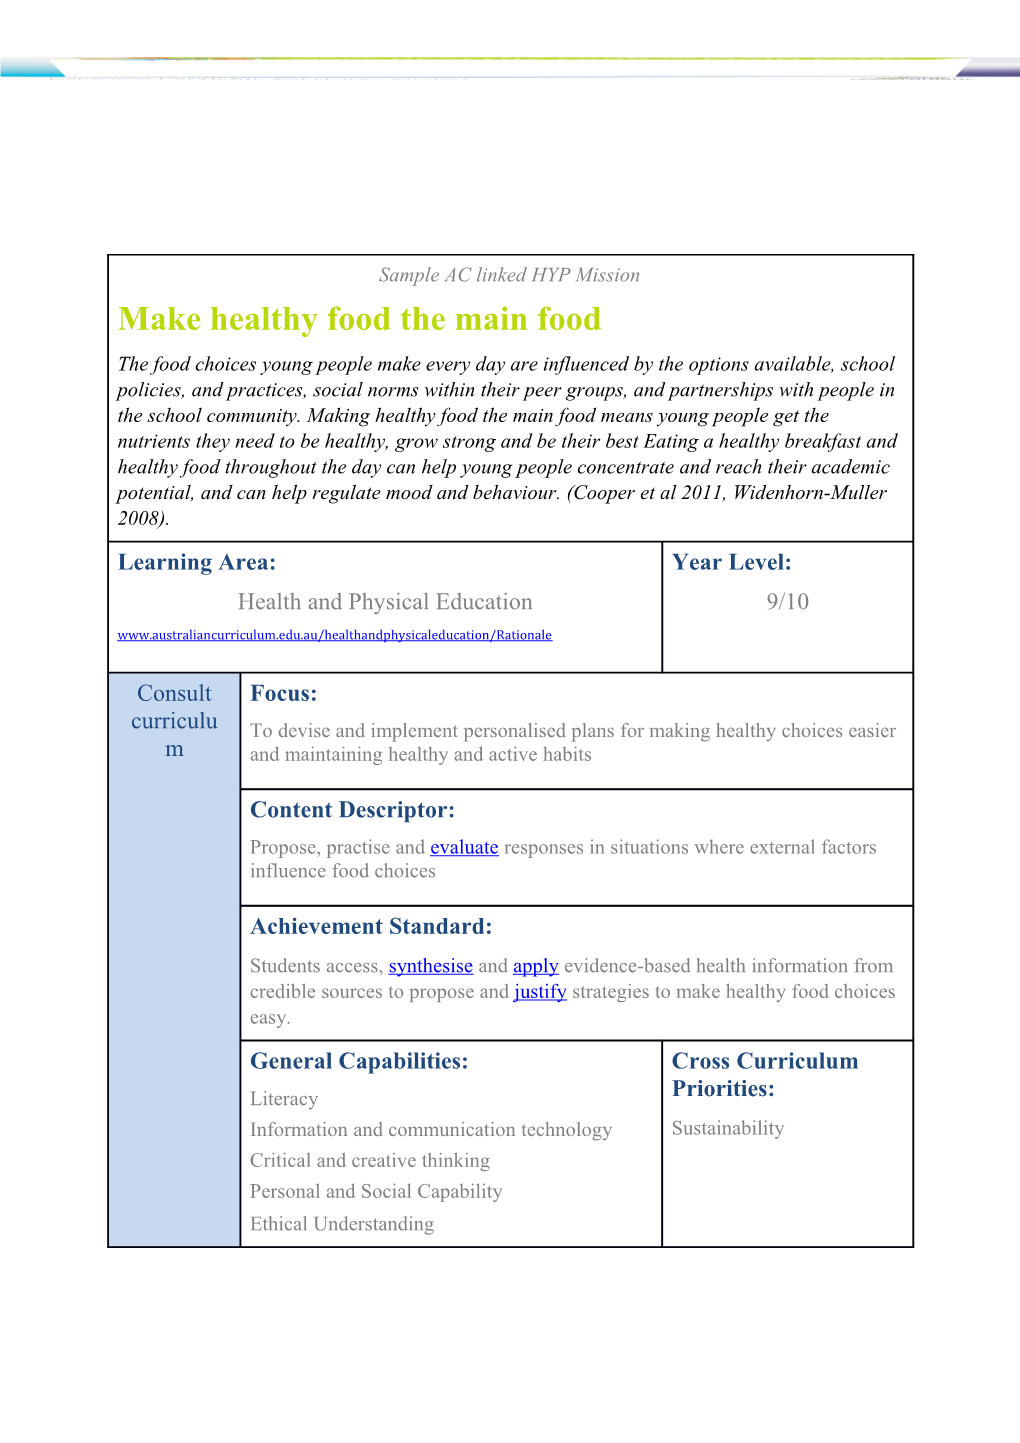 Nutritional Requirements and Dietary Needs (Including the Australian Dietary Guidelines 2013)